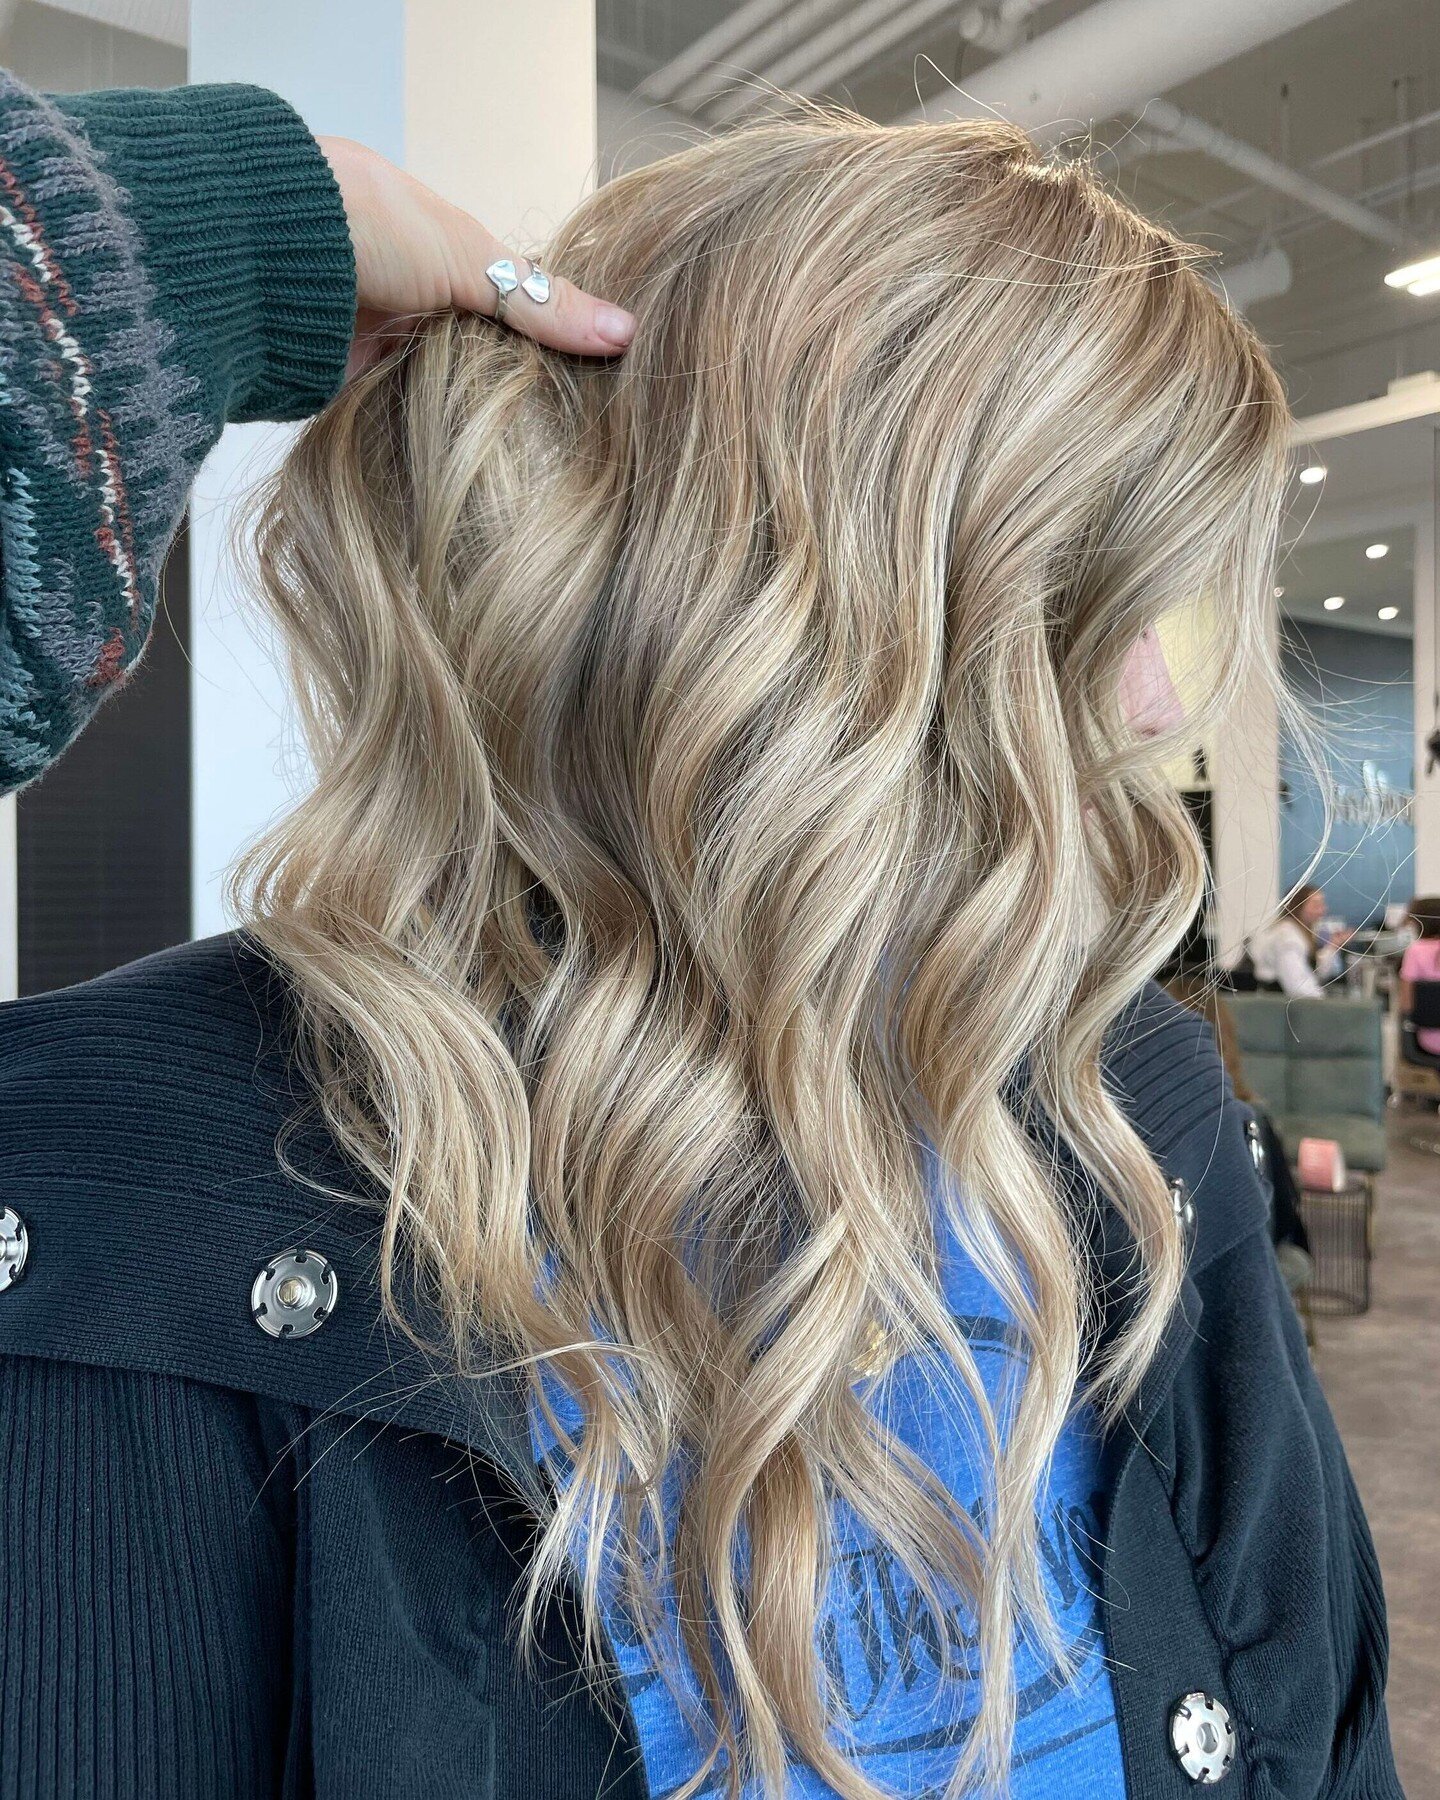 baby blonde ☀️
⠀
Obsessed with how perfect these highlights turned out!
⠀
If you are looking for an upgrade on your blonde 𝗴𝗶𝘃𝗲 𝘂𝘀 𝗮 𝗰𝗮𝗹𝗹 𝗮𝗻𝗱 𝗯𝗼𝗼𝗸 𝗮 𝗳𝗿𝗲𝗲 𝗰𝗼𝗻𝘀𝘂𝗹𝘁𝗮𝘁𝗶𝗼𝗻
⠀
403-703-1315 📲